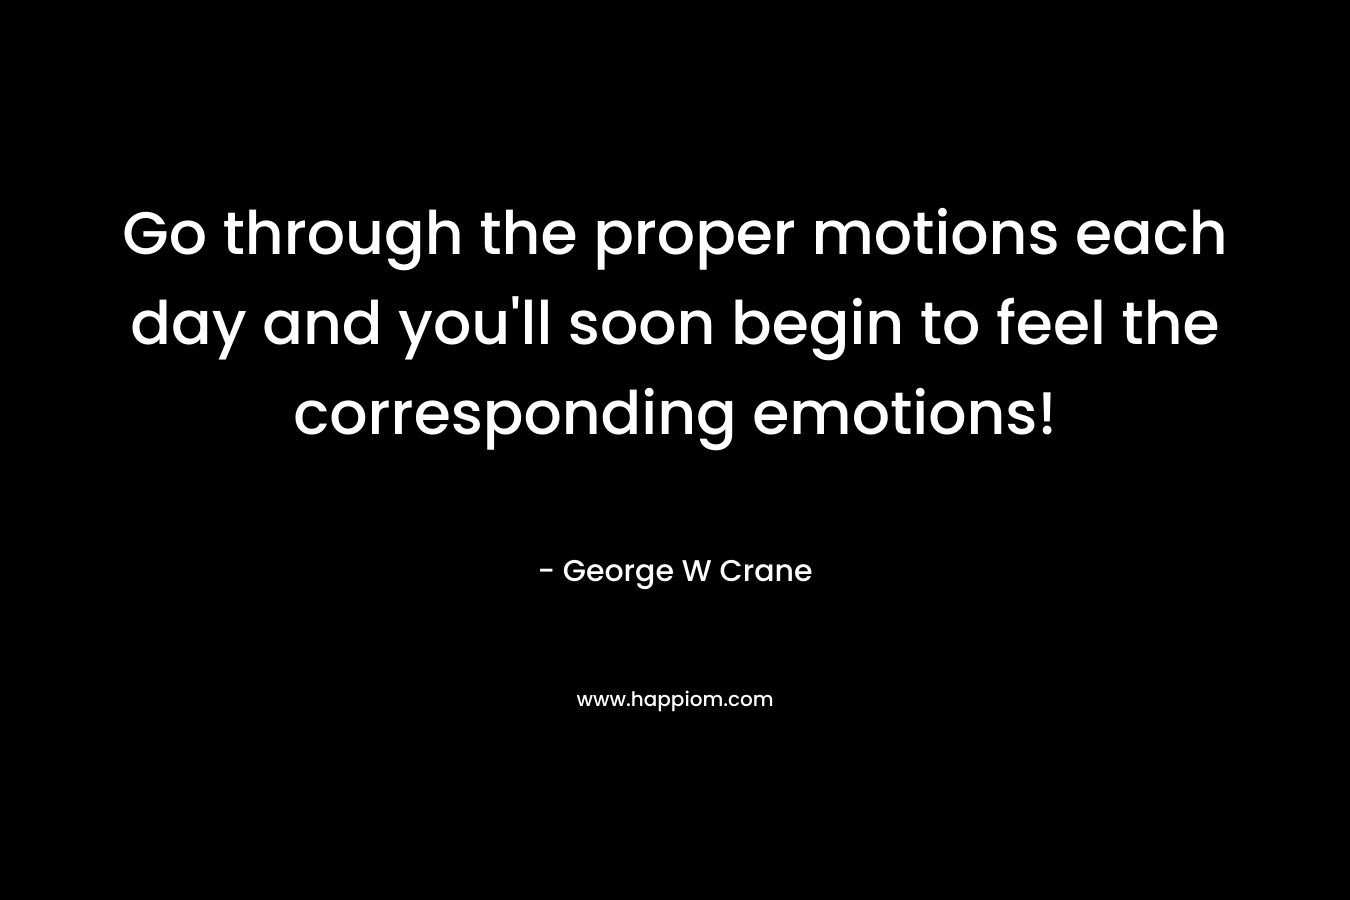 Go through the proper motions each day and you'll soon begin to feel the corresponding emotions!